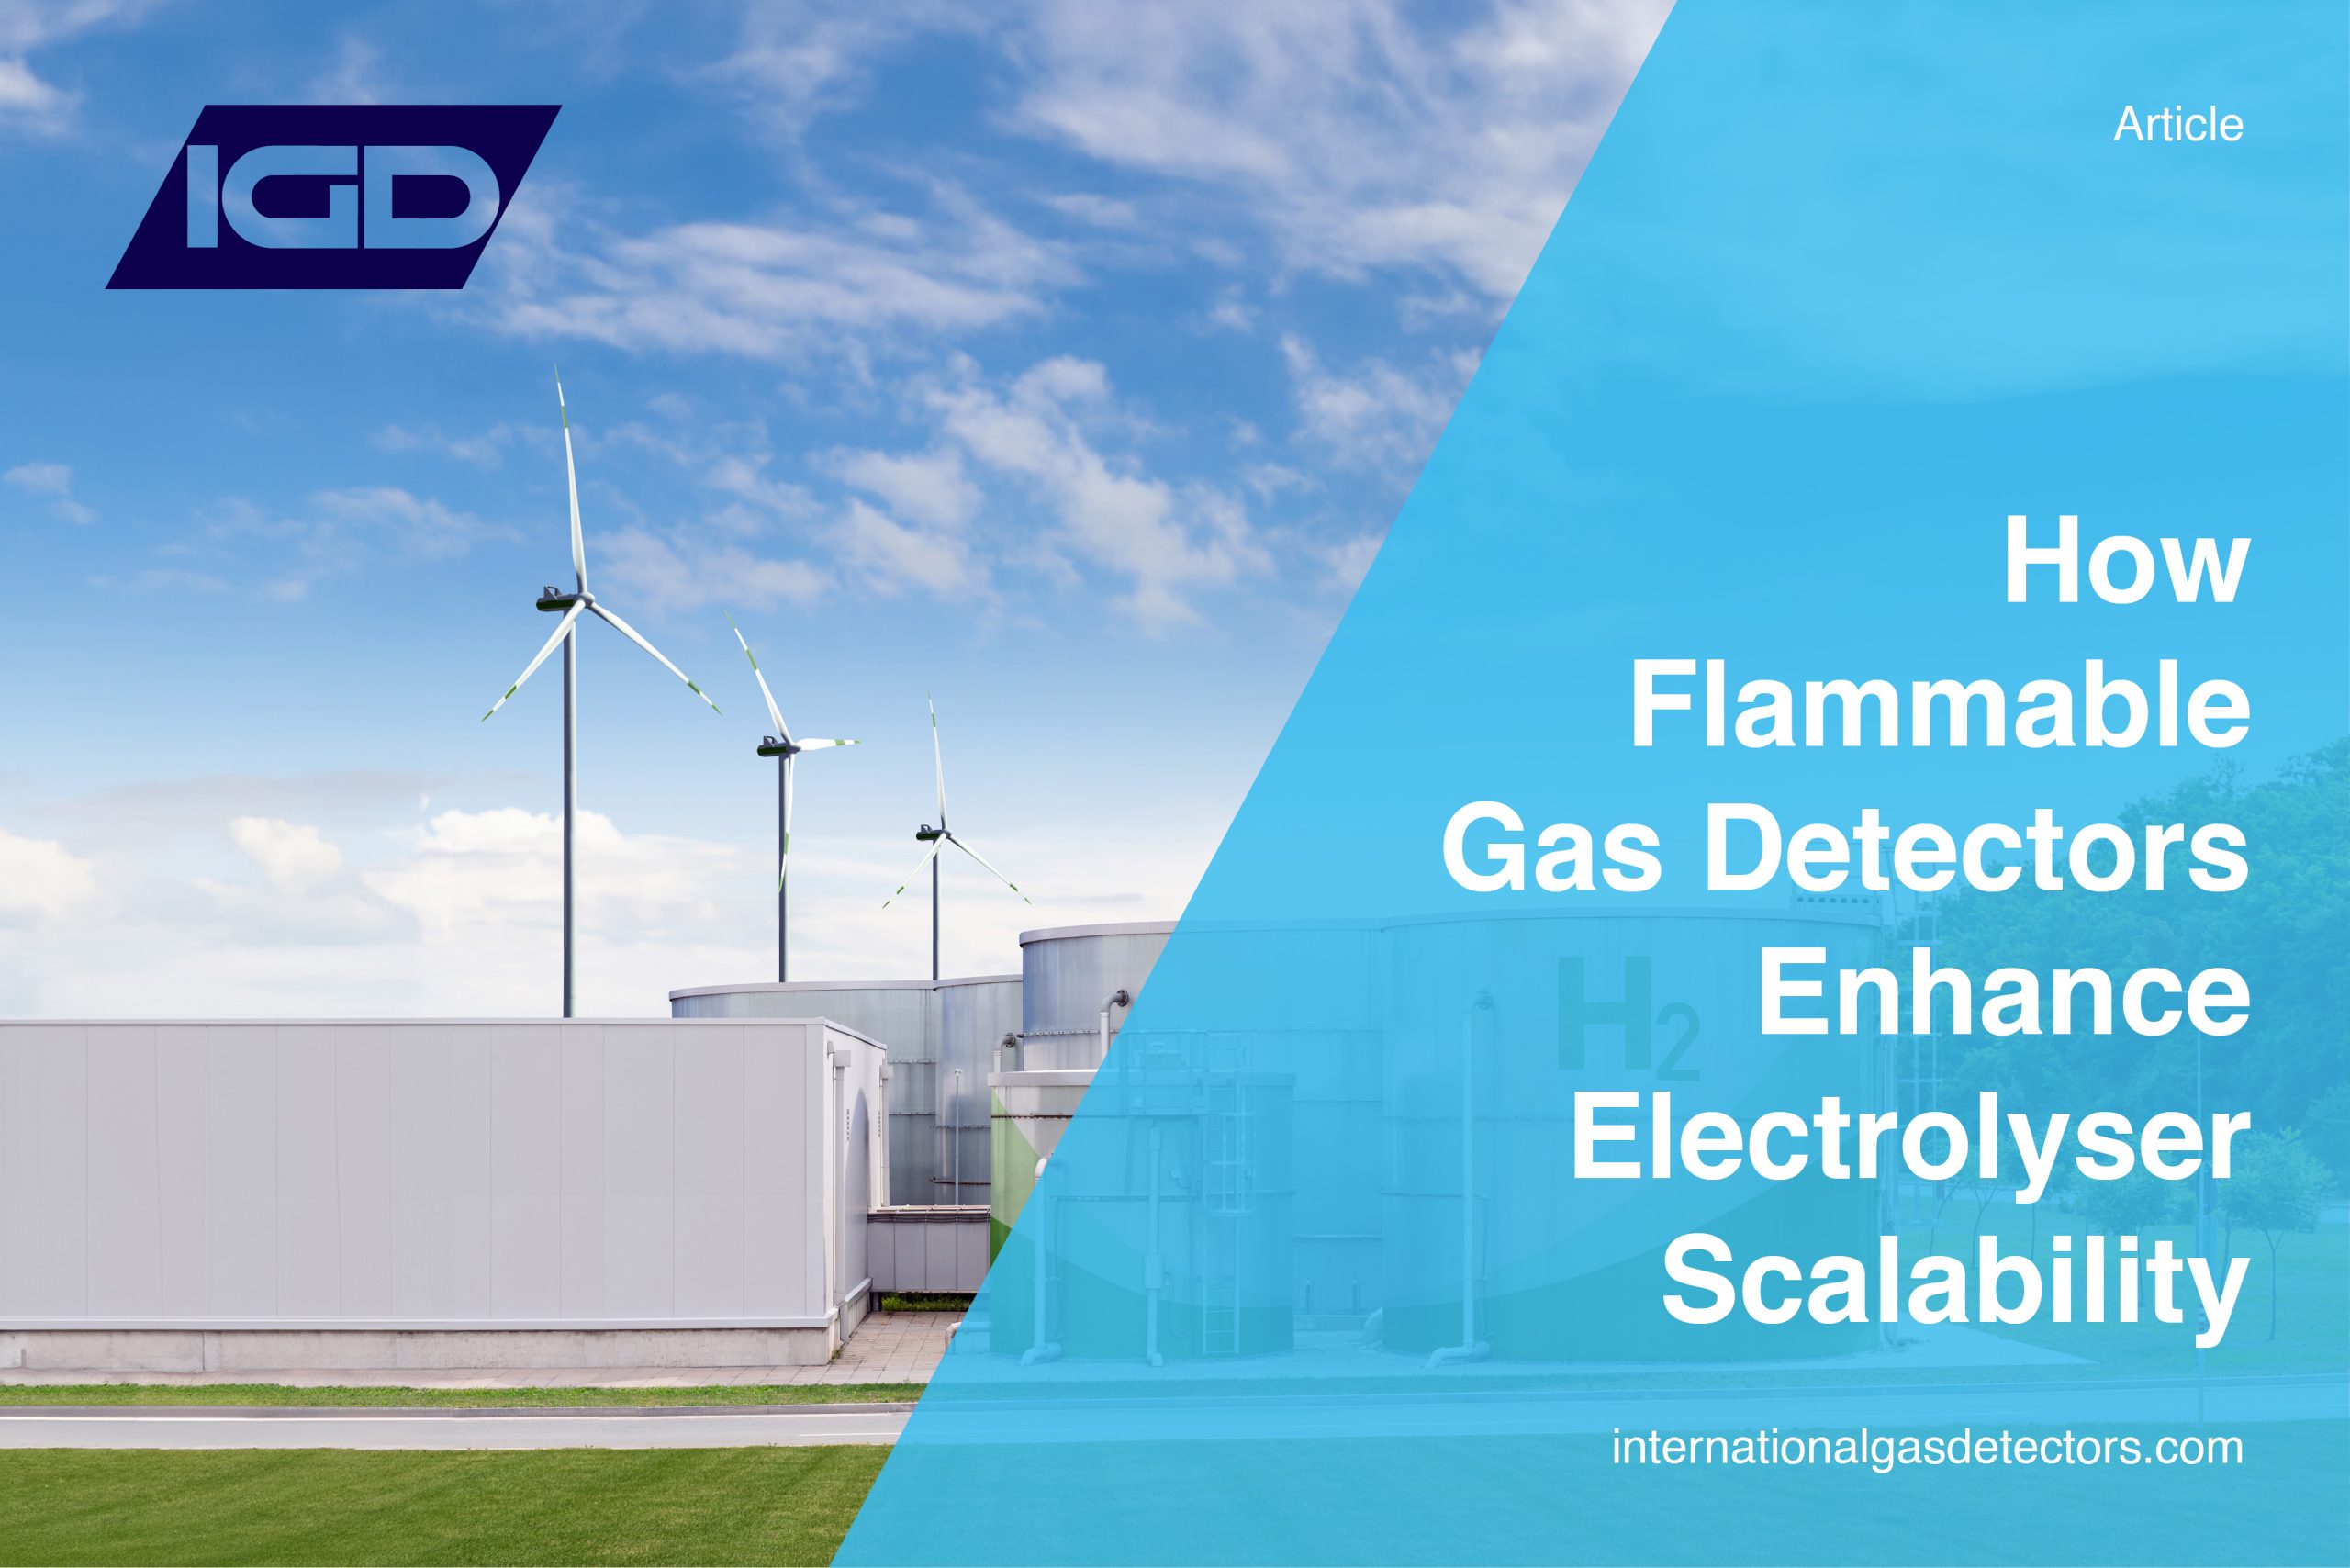 IGD: How Flammable Gas Detectors Enhance Electrolyser Scalability?